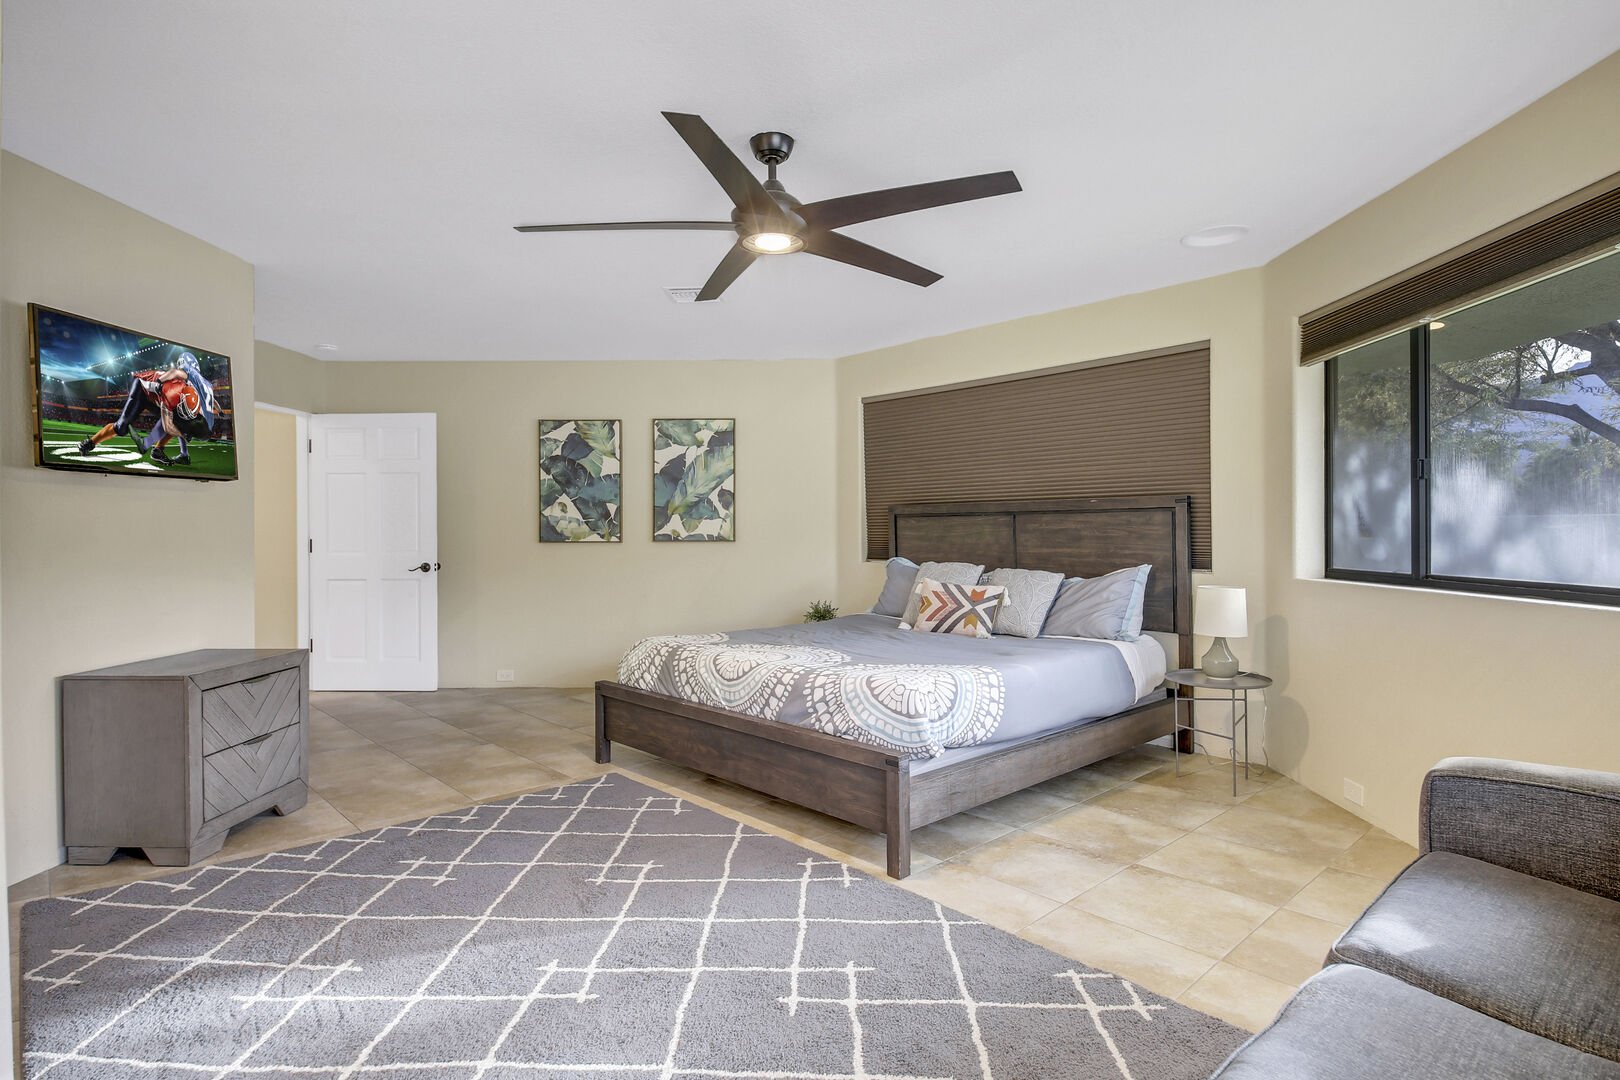 Stay cool under the a switch-controlled ceiling fan, and a large walk-in closet.